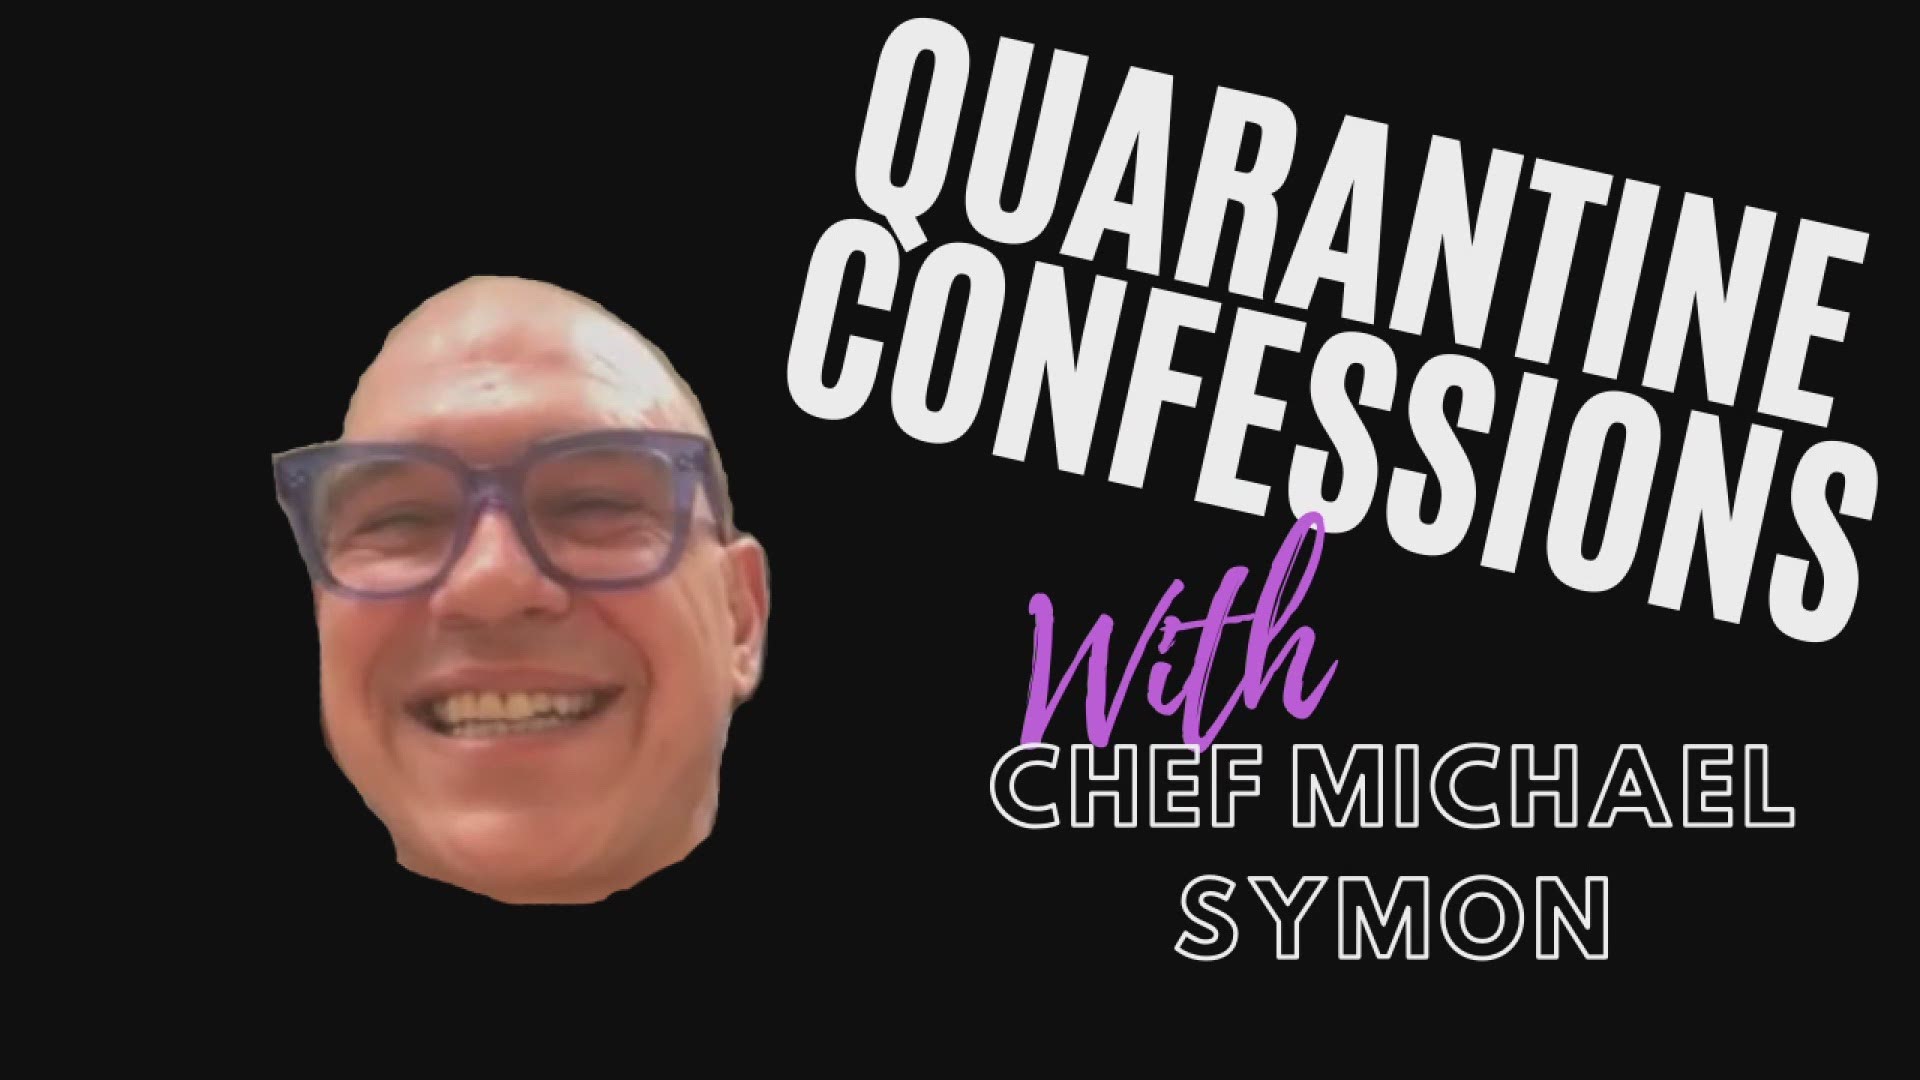 There is no doubt that Chef Michael Symon loves food, but where do you think his first meal would be once the lock down is lifted? He tells all with Austin Love!